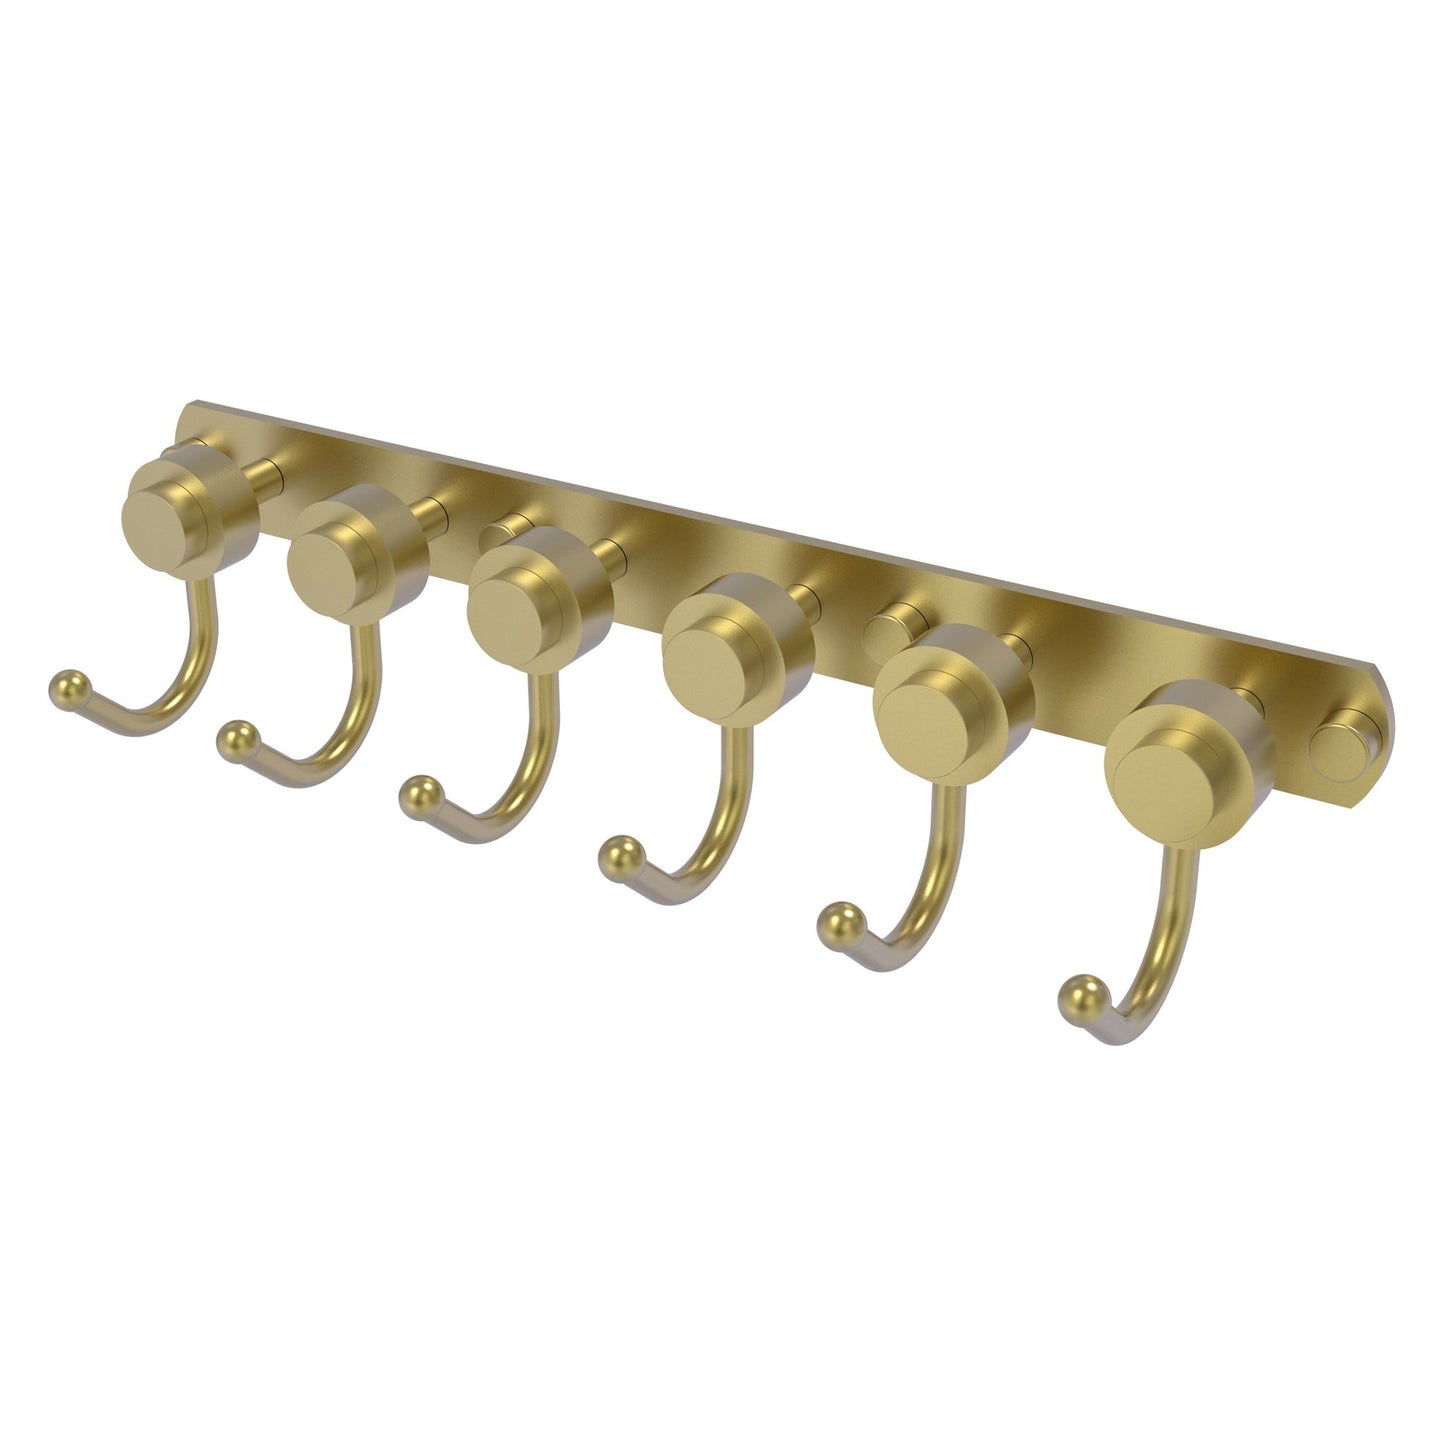 Allied Brass Mercury 15.5" x 4" Satin Brass Solid Brass 6-Position Tie and Belt Rack With Smooth Accent